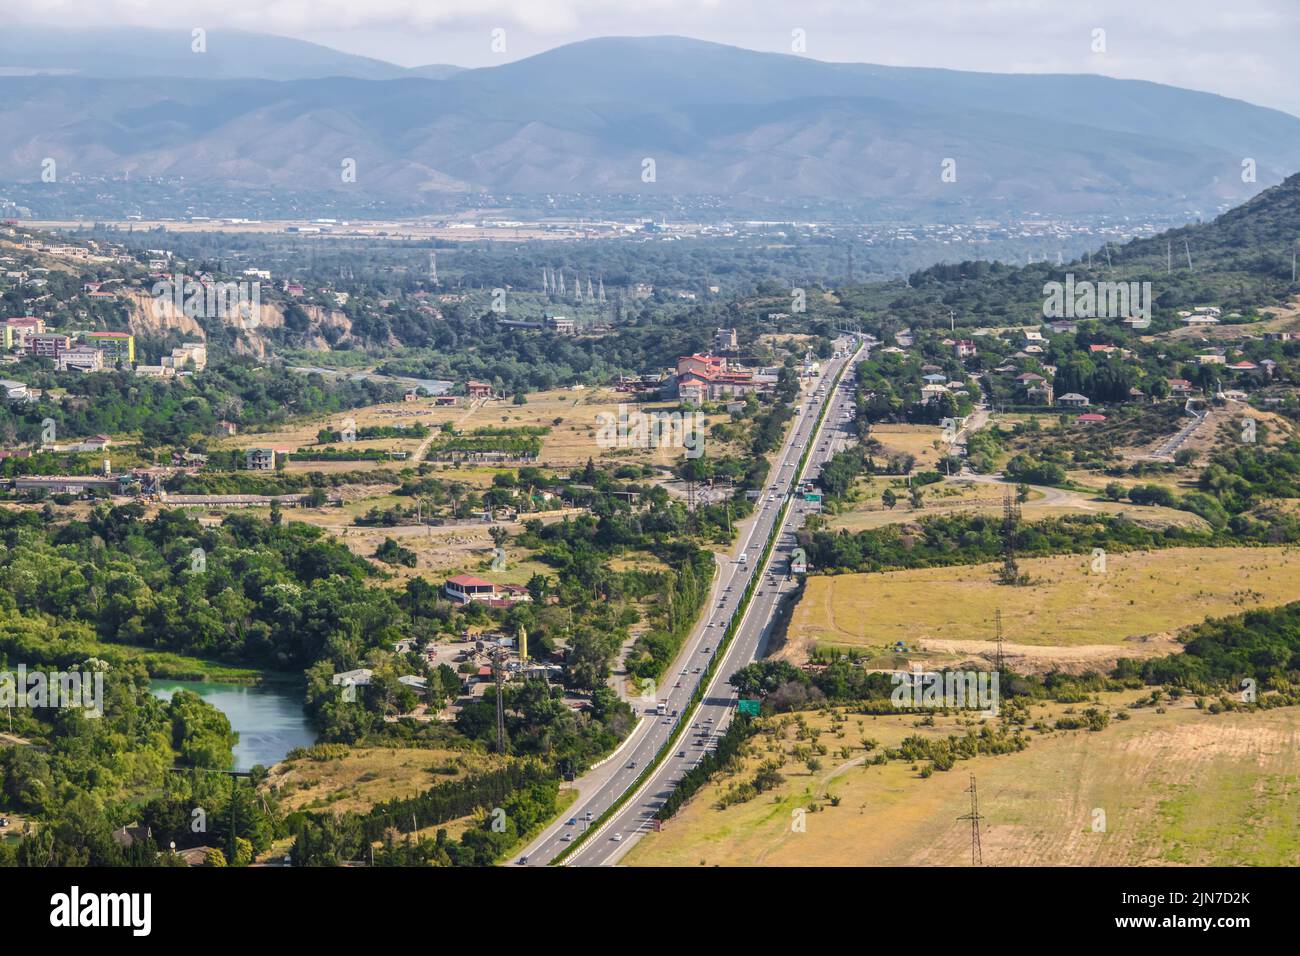 The countryside of the Republic of Georgia near Tbilisi where the highway branches north at Mtskheta near Jvari Monastery showing houses and farmland Stock Photo